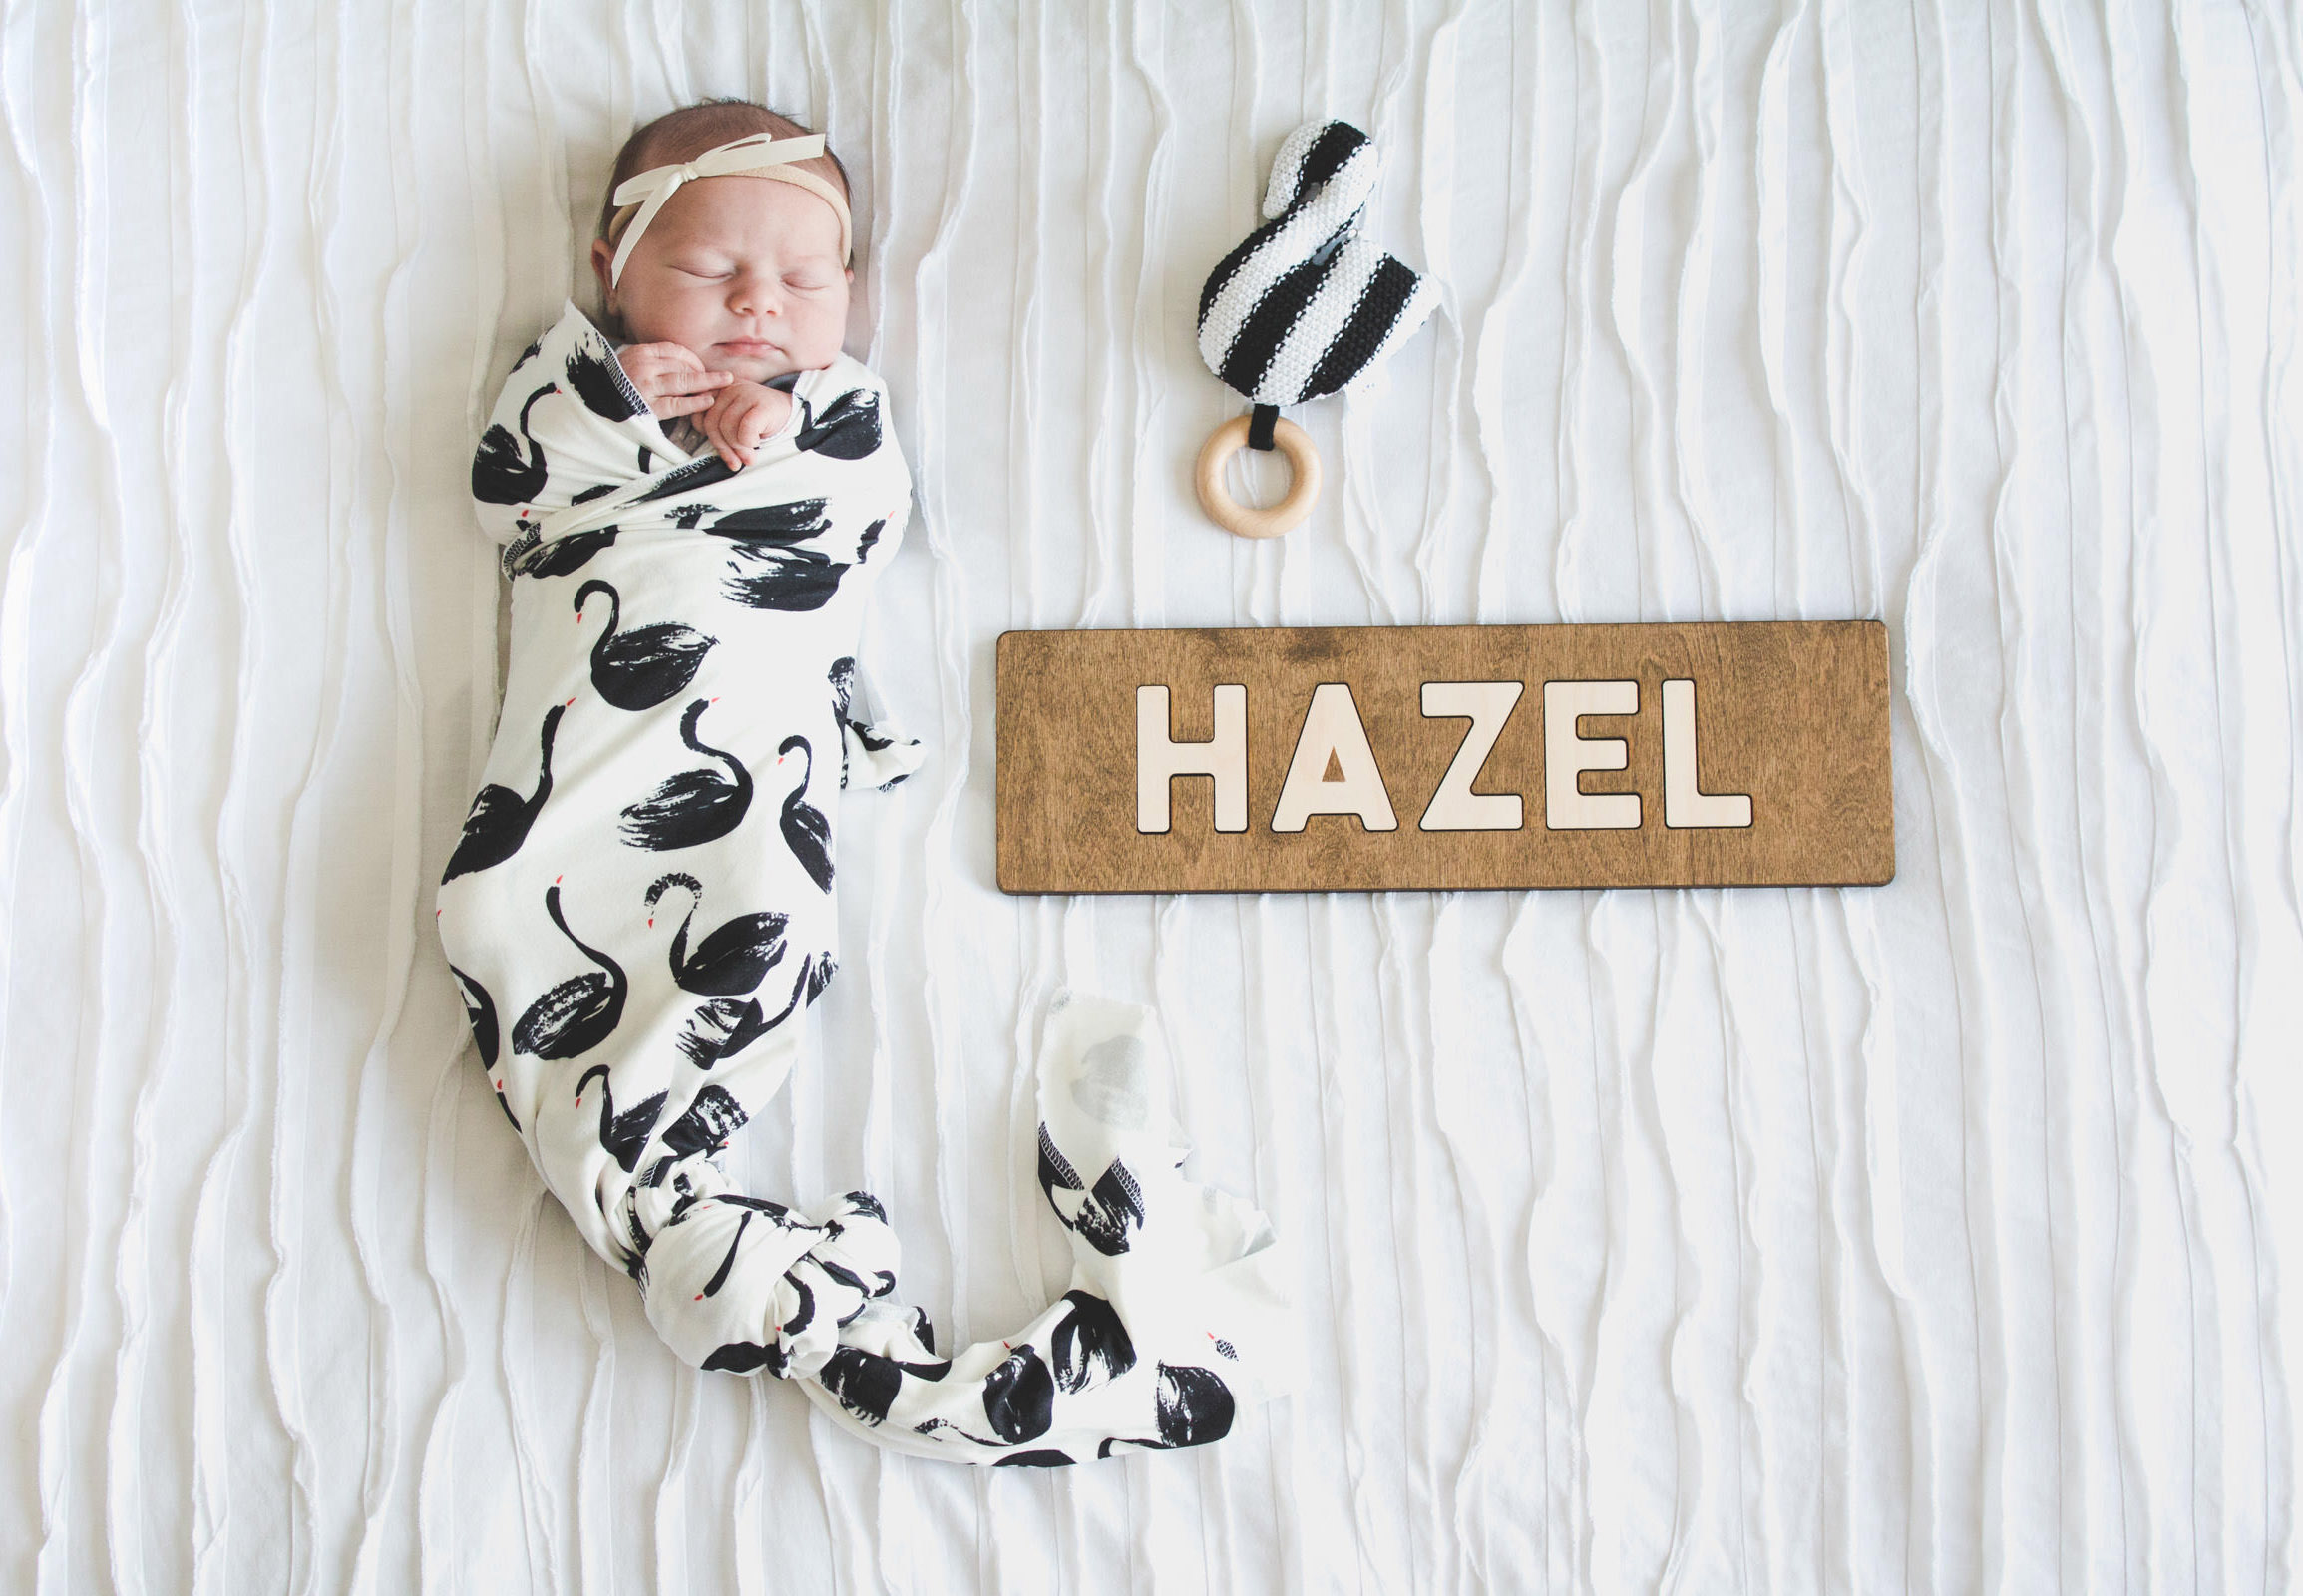 The Biblical Meaning of the Name Hazel